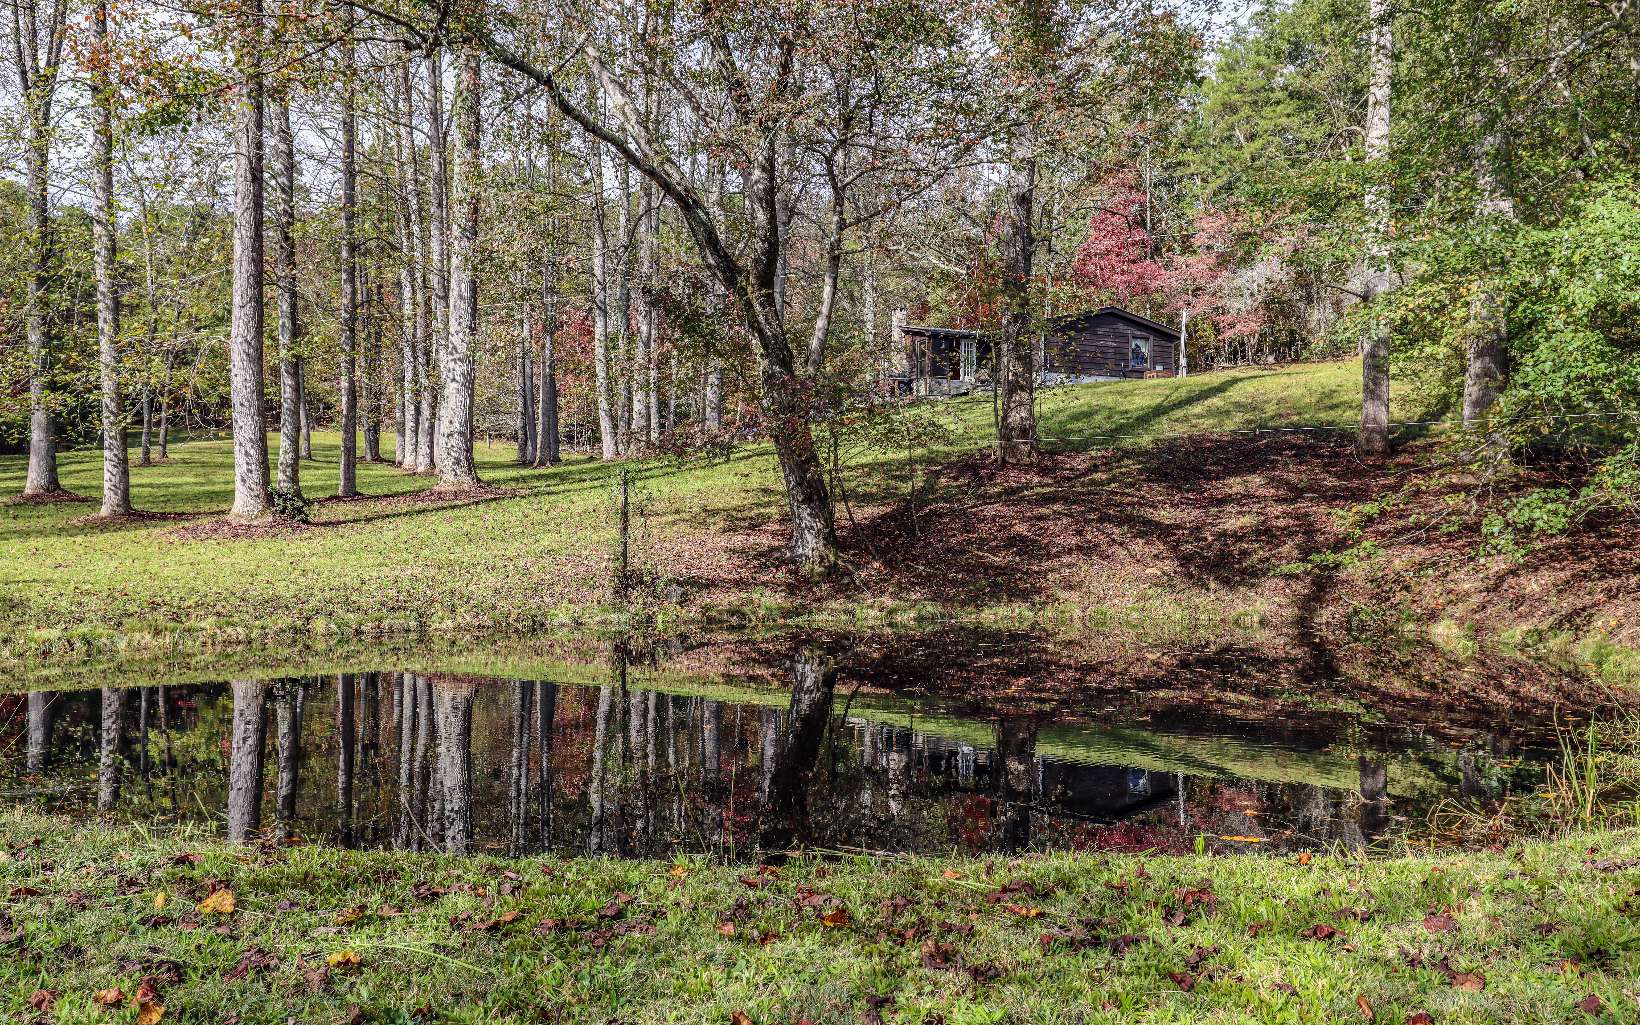 Gorgeous 6.47 acres over 1300 ft of CREEK FRONTAGE and a small POND. 3BR/2BA home was completely remodeled in 2007 into a cabin style with metal roof, wood floors, T & G walls, beams, lots of custom touches! Bring your farm or a great investment for sub dividing into multiple home sites. Check out the videos in the links for directions and walk through.